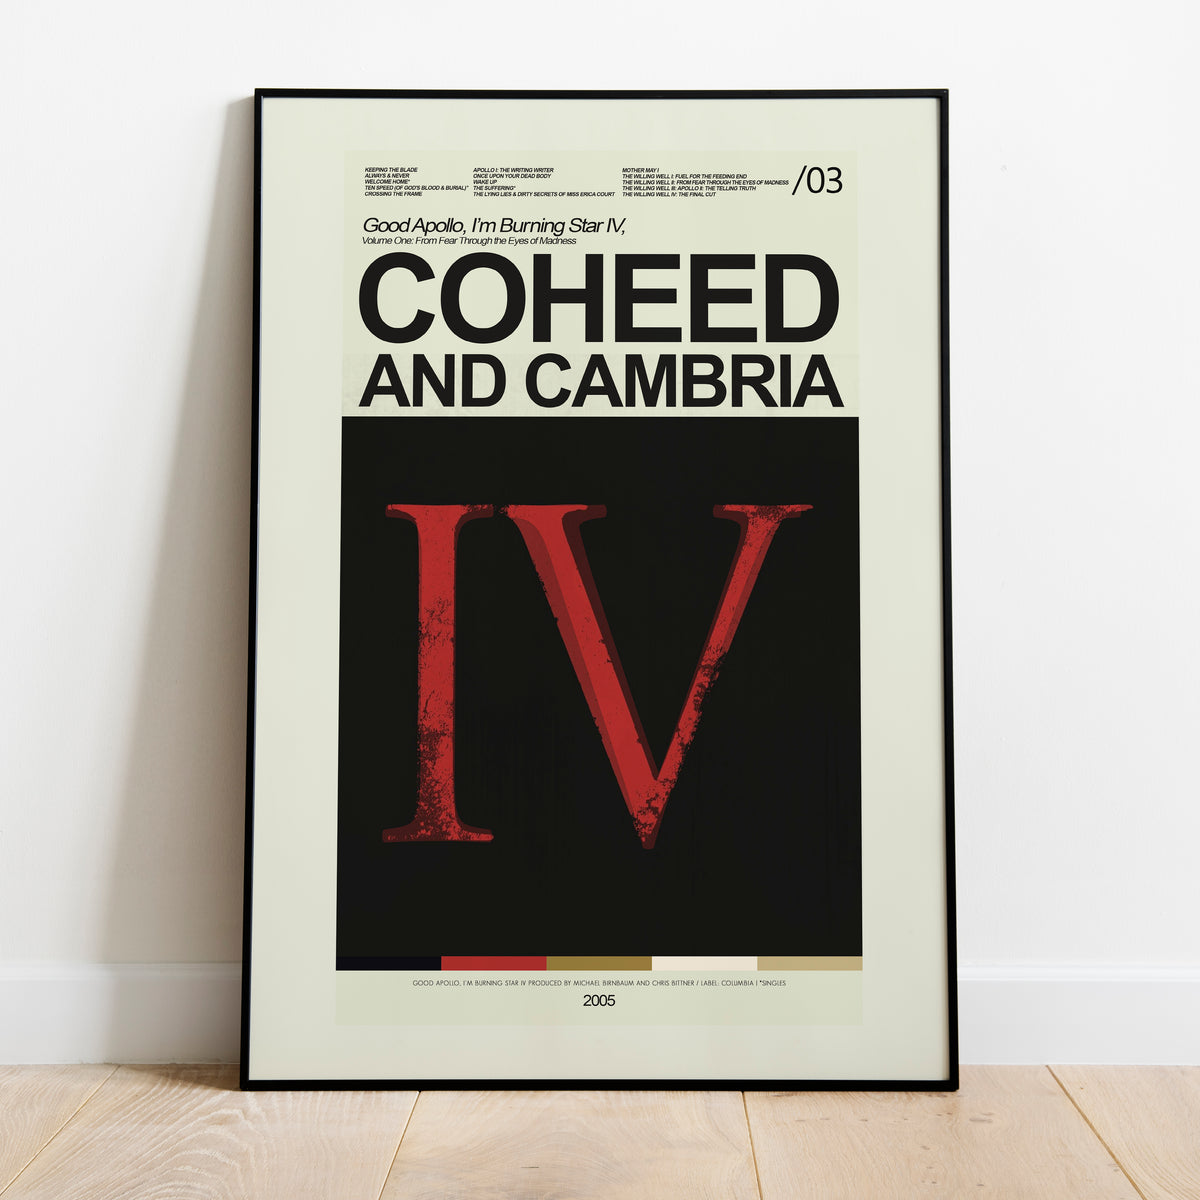 Coheed and Cambria - Good Apollo, I'm Burning Star IV | 12"x18" or 18"x24" Print only